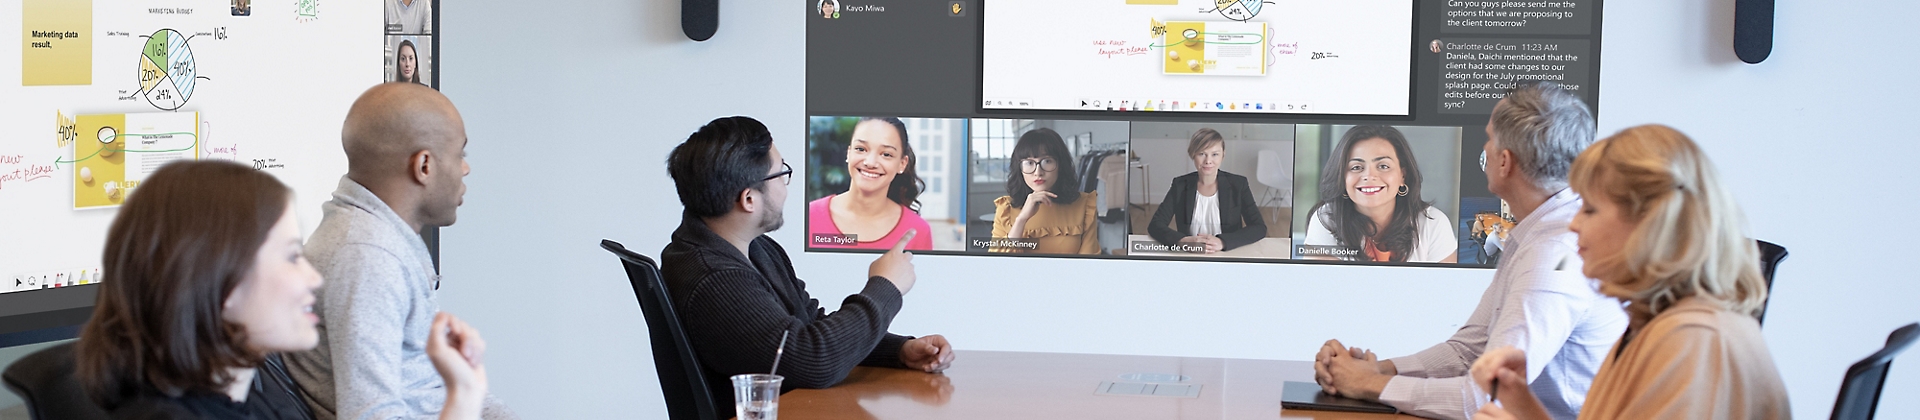 Five people in a meeting room participating in a Teams video call with live captions being projected on the wall.